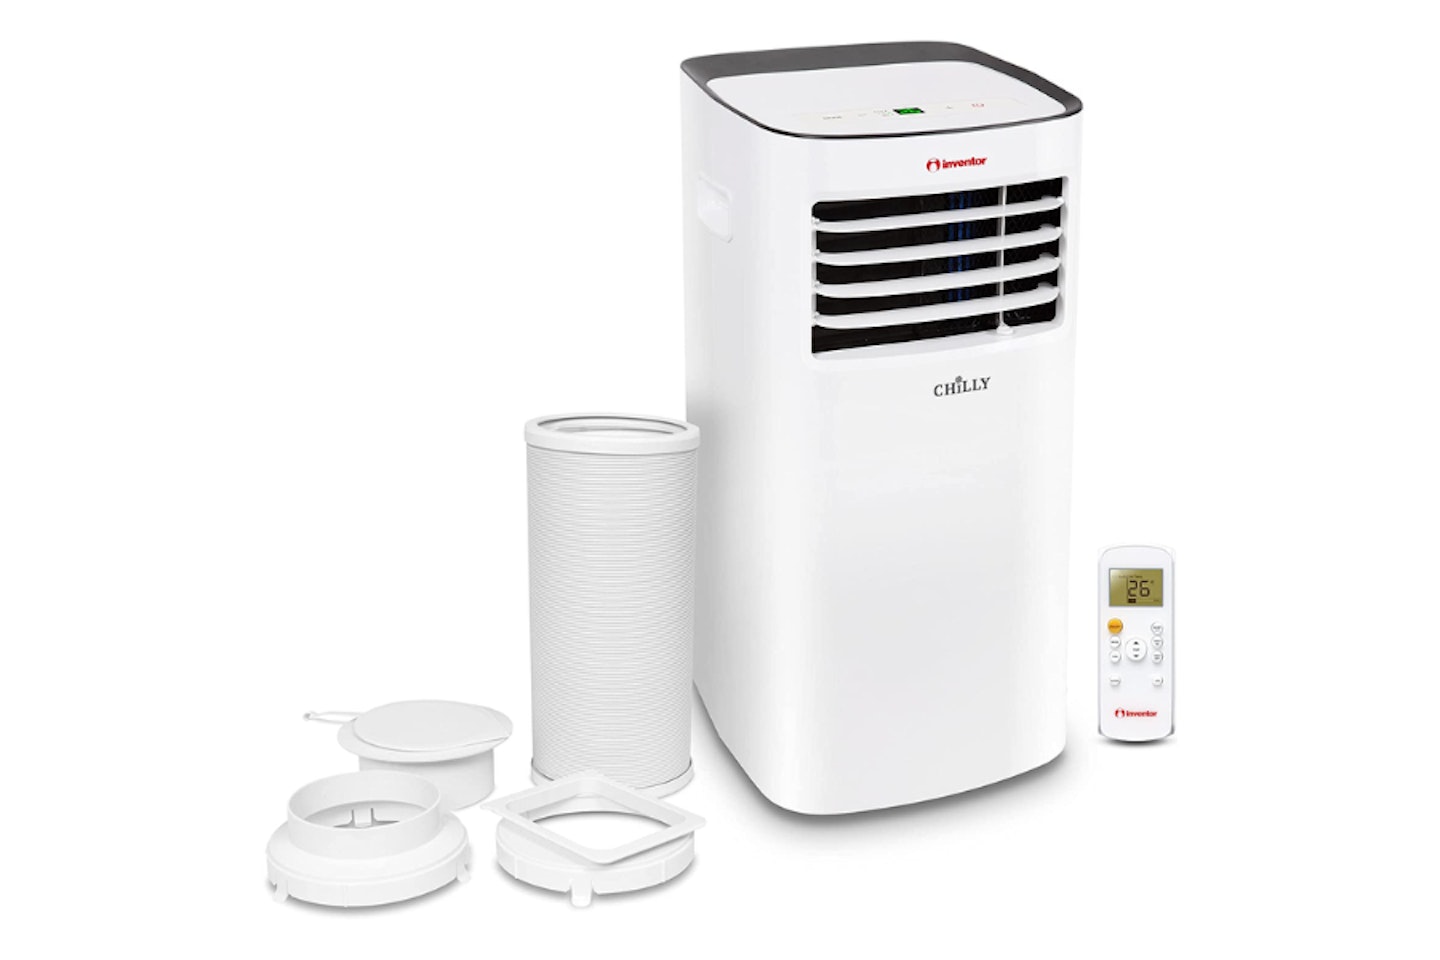 Inventor Chilly Portable Air Conditioner - one of the best portable air conditioners of 2023